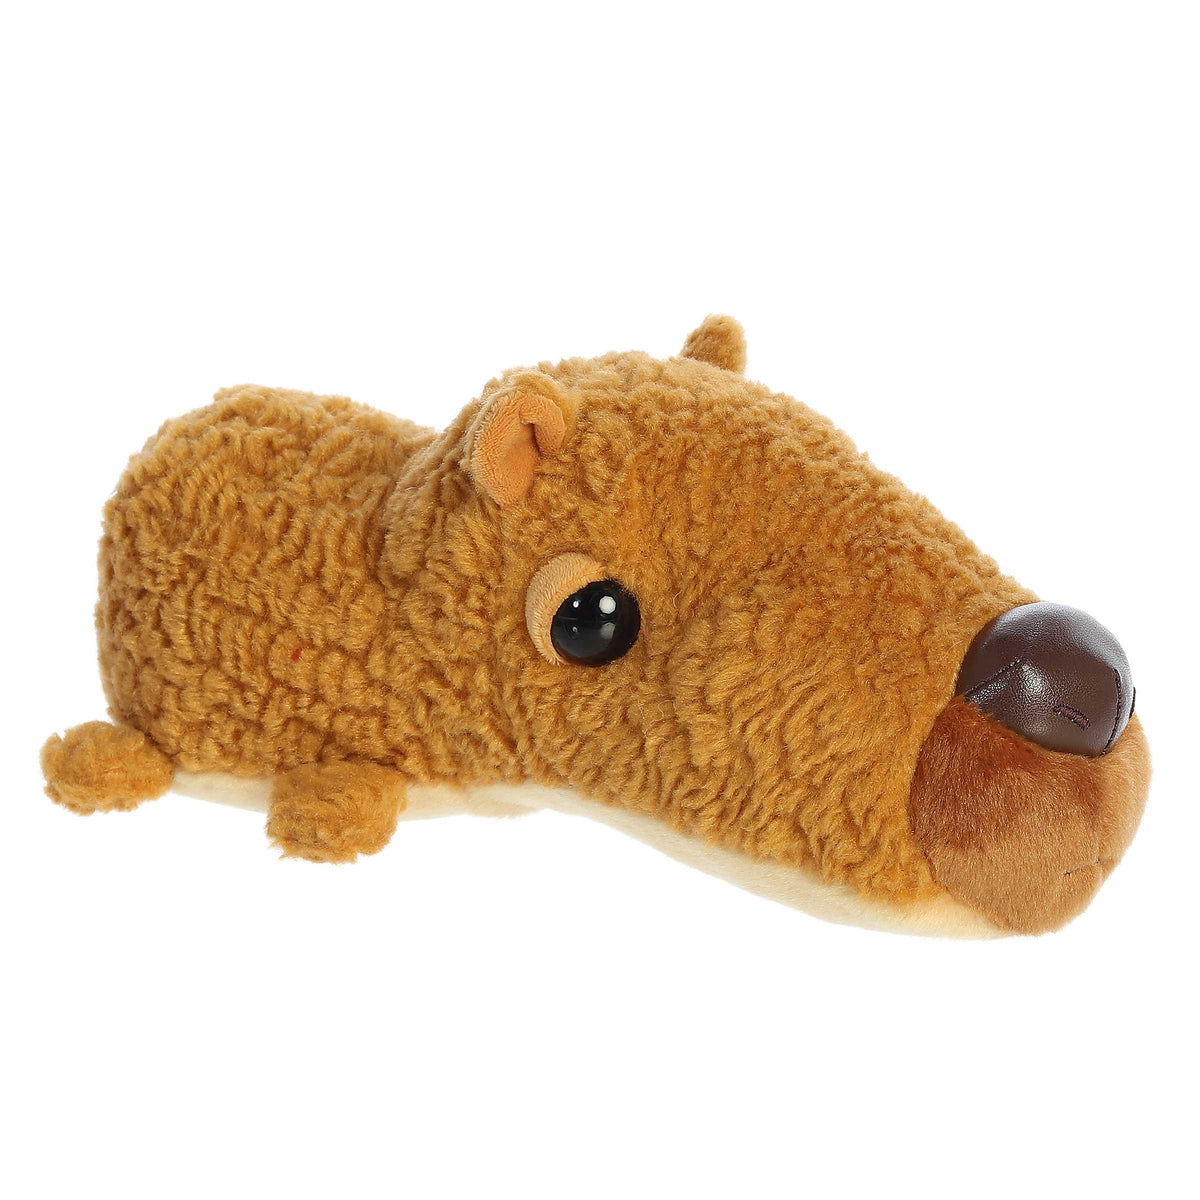 Cameron Capybara plush from Schnozzles, a brown plush with a distinctive snout